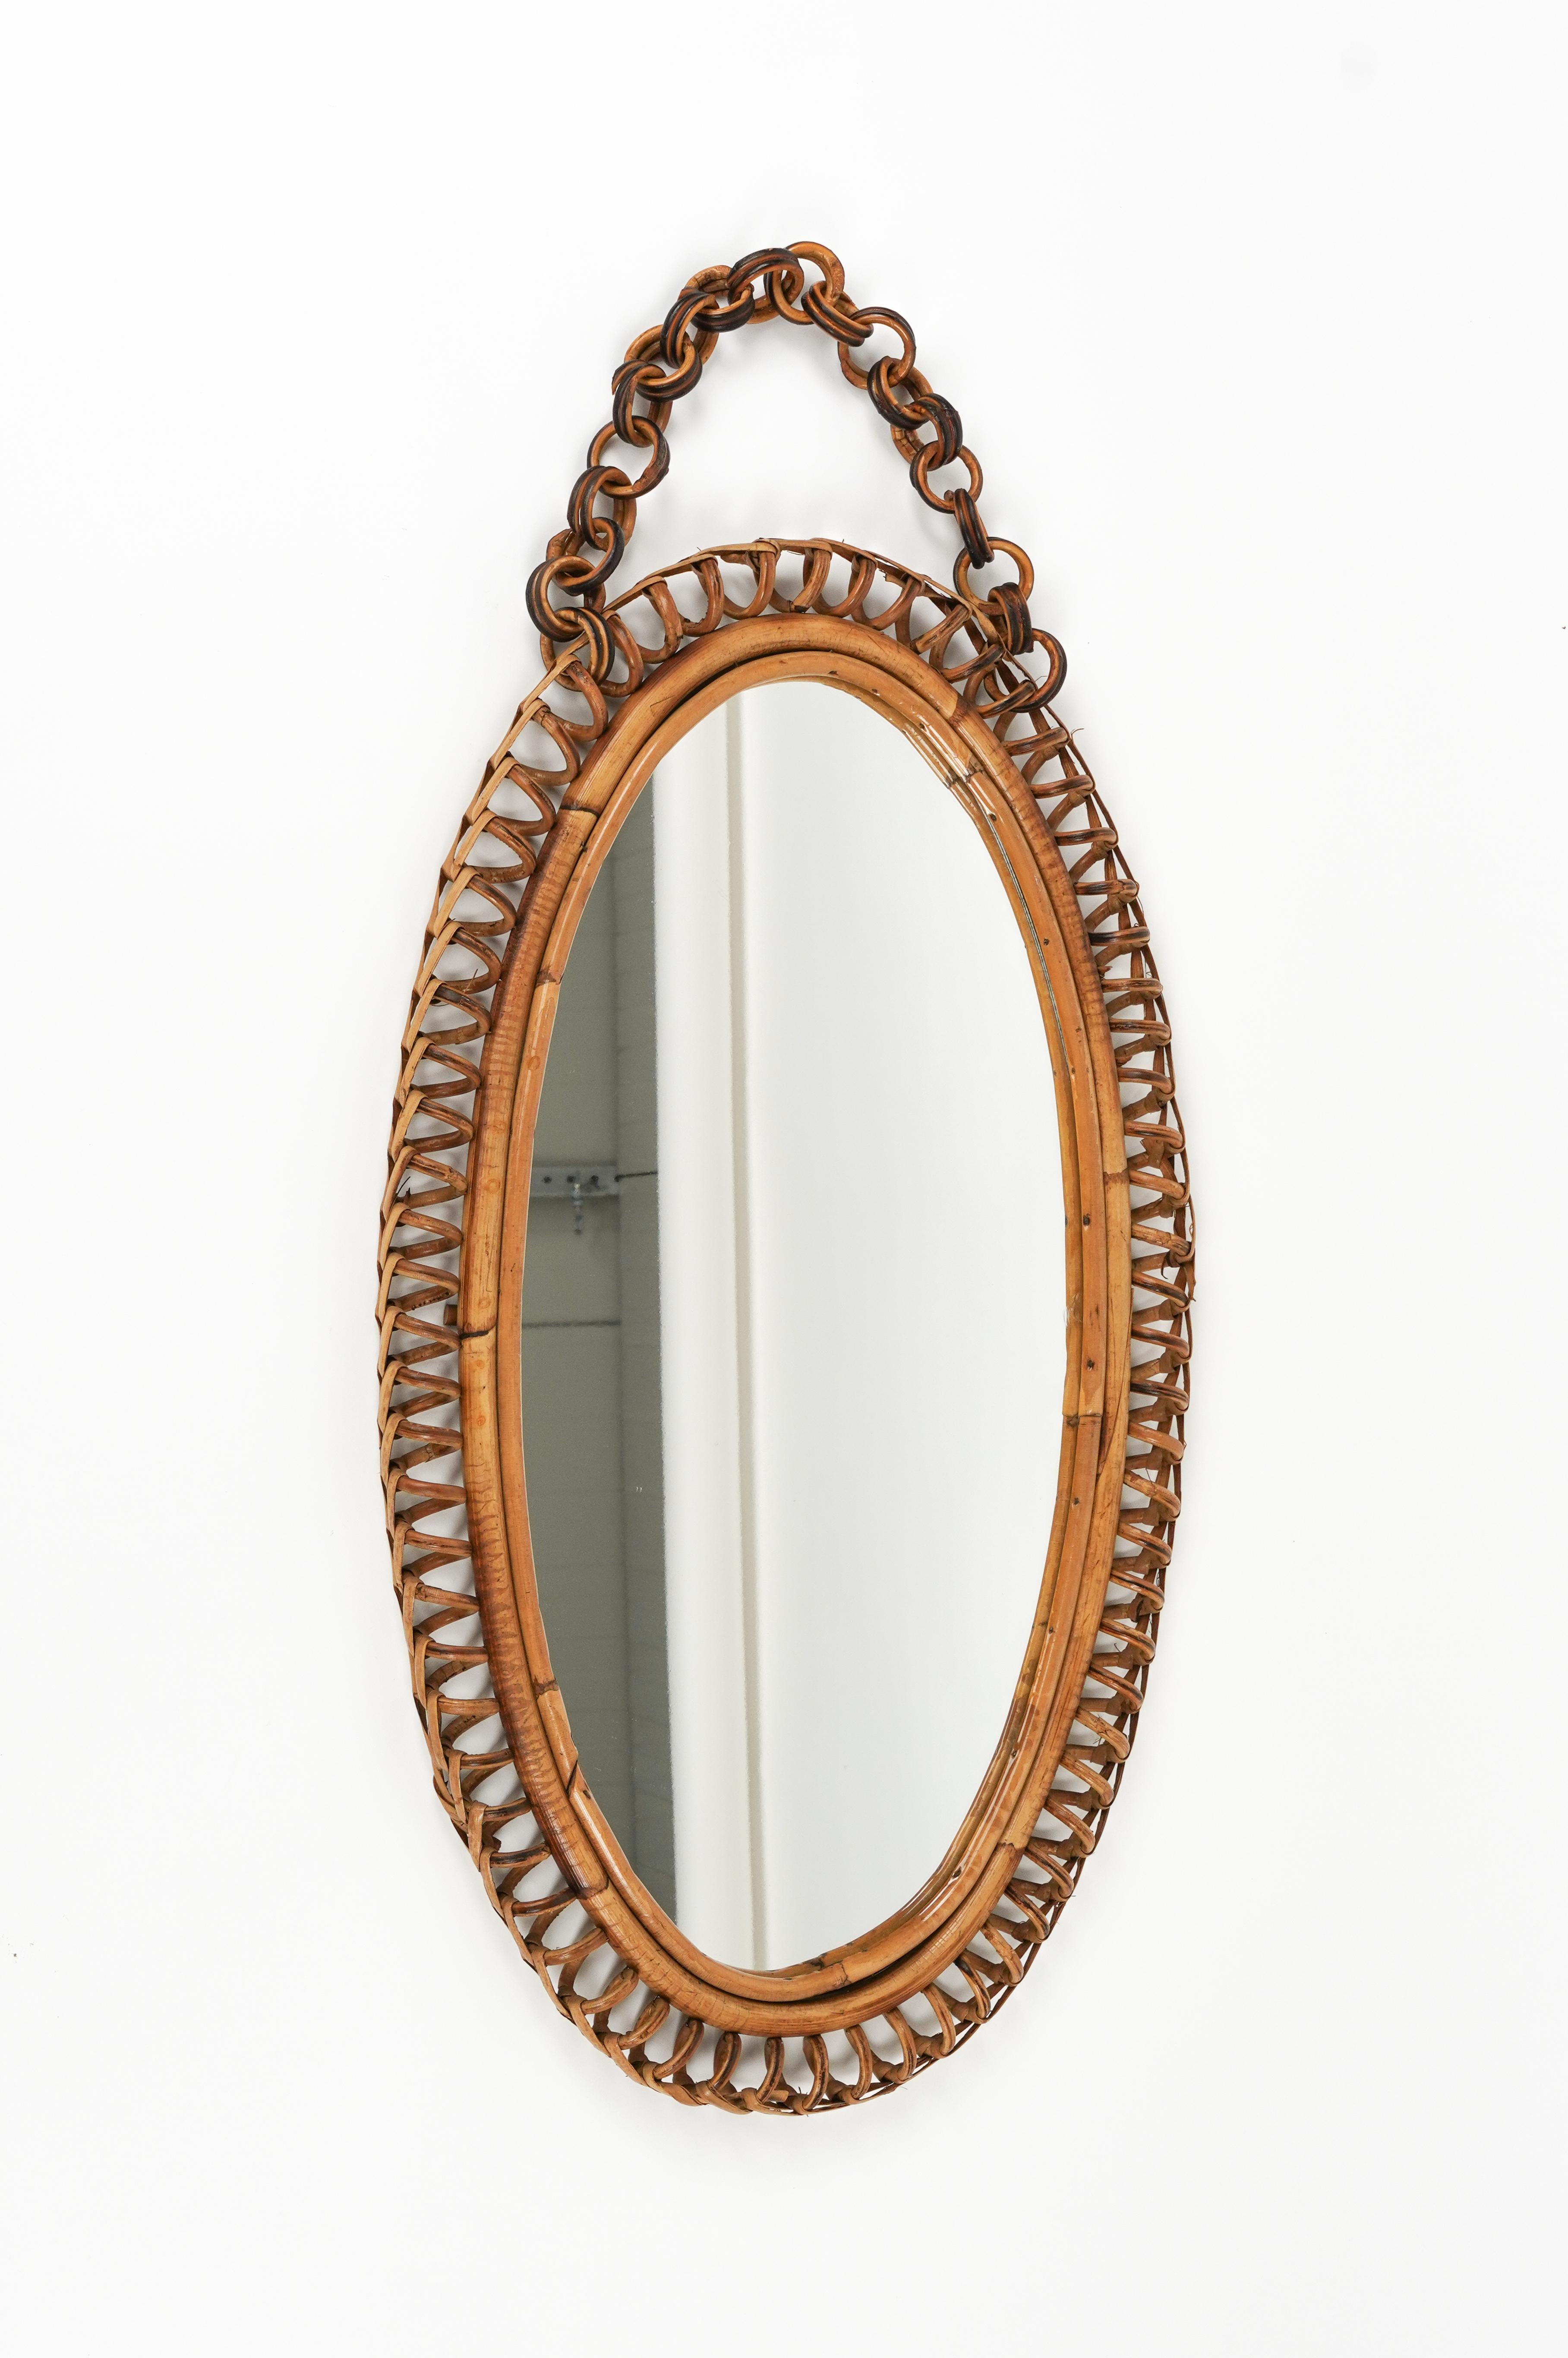 Mid-Century Modern Midcentury Rattan & Bamboo Oval Wall Mirror with Chain, Italy 1960s For Sale